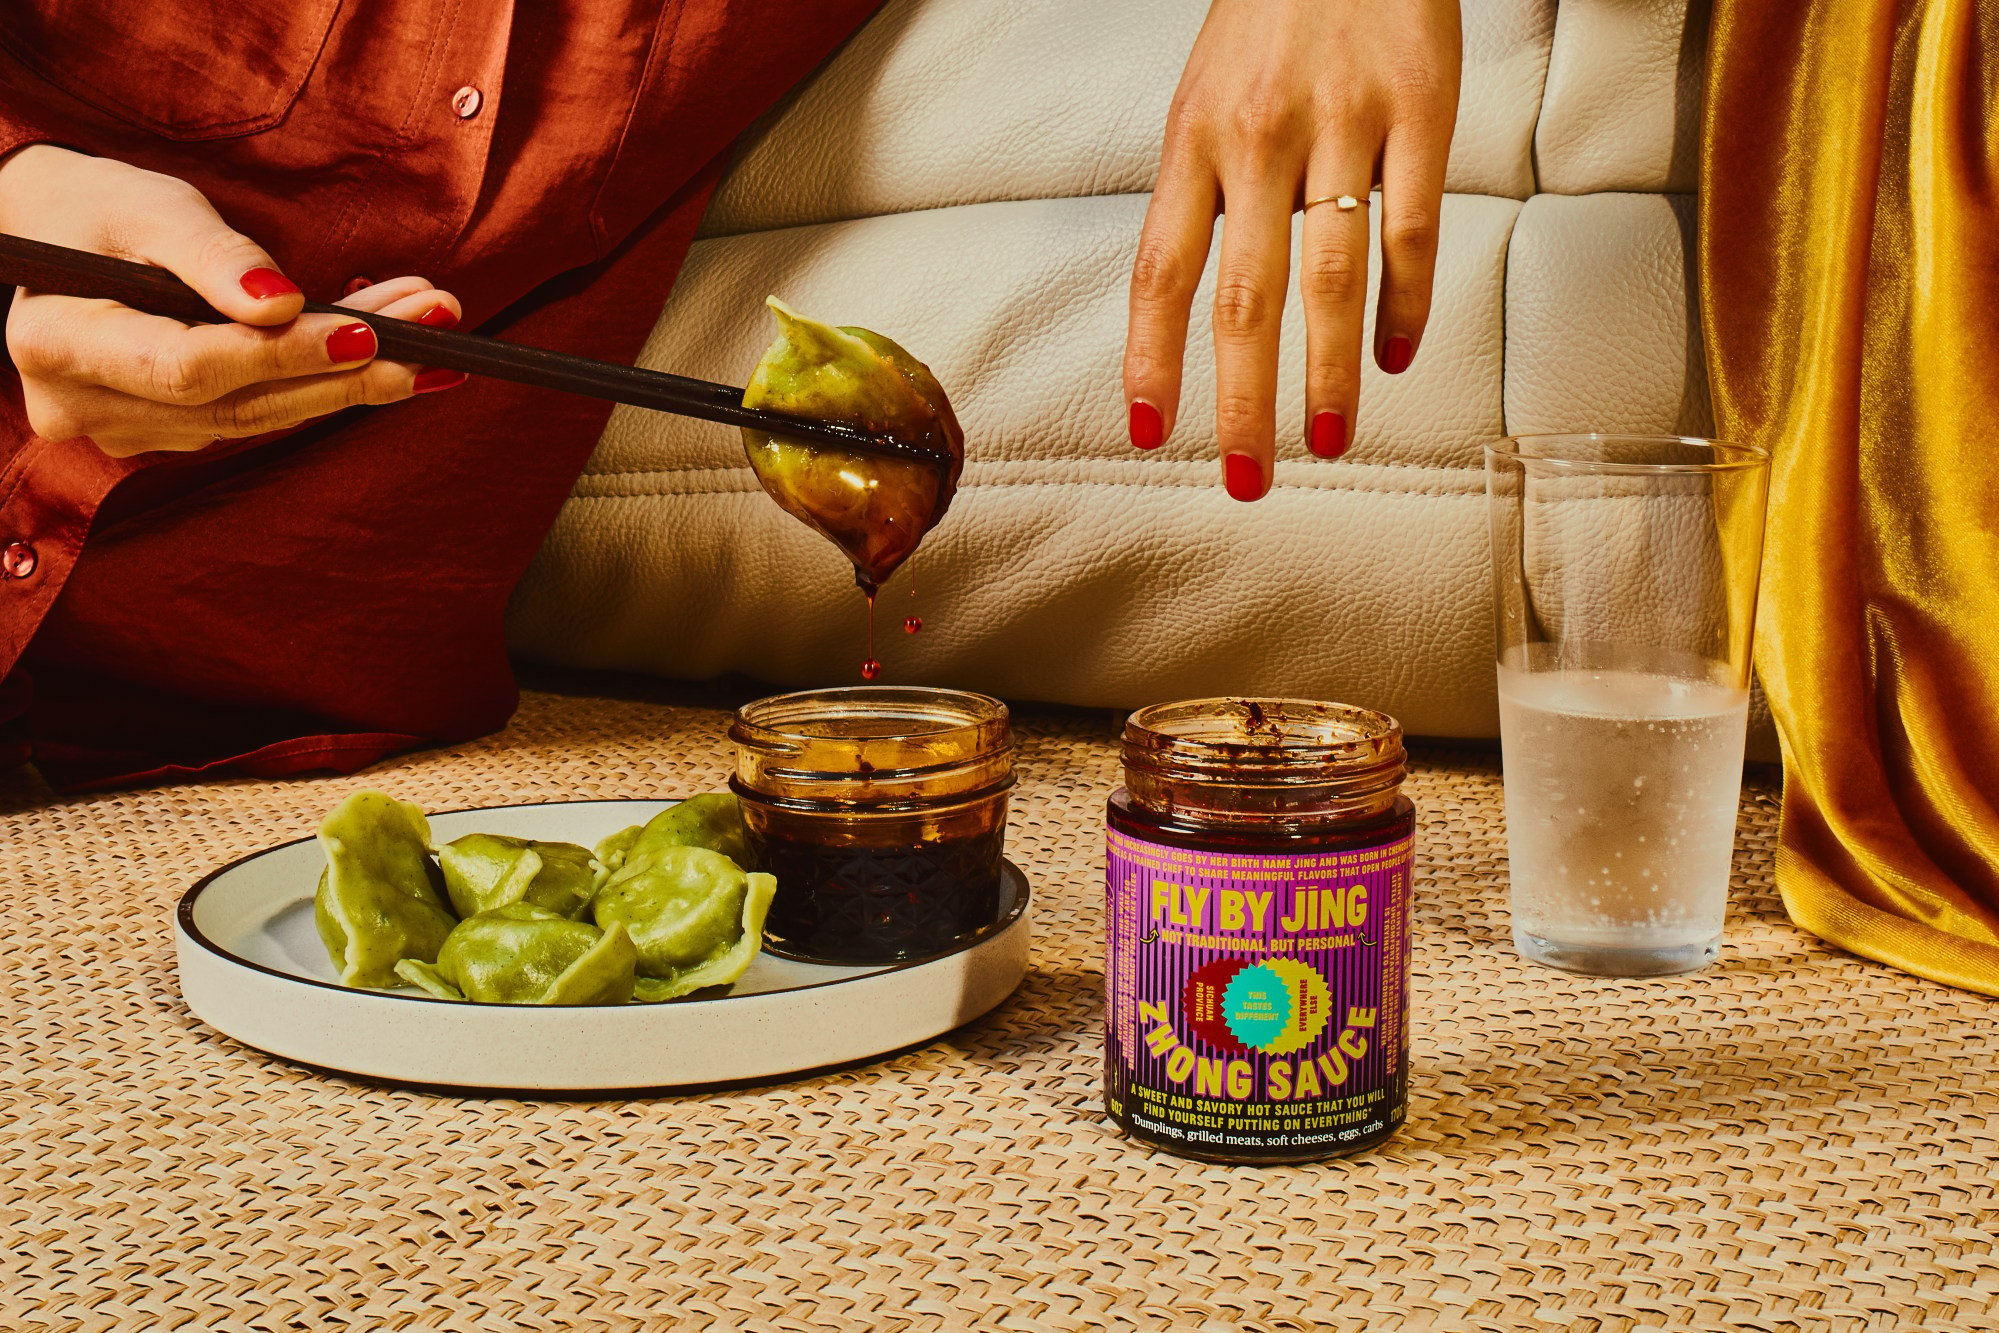 how chinese chilli sauce brand fly by jing became hot stuff in the us, and why its founder reclaimed her birth name